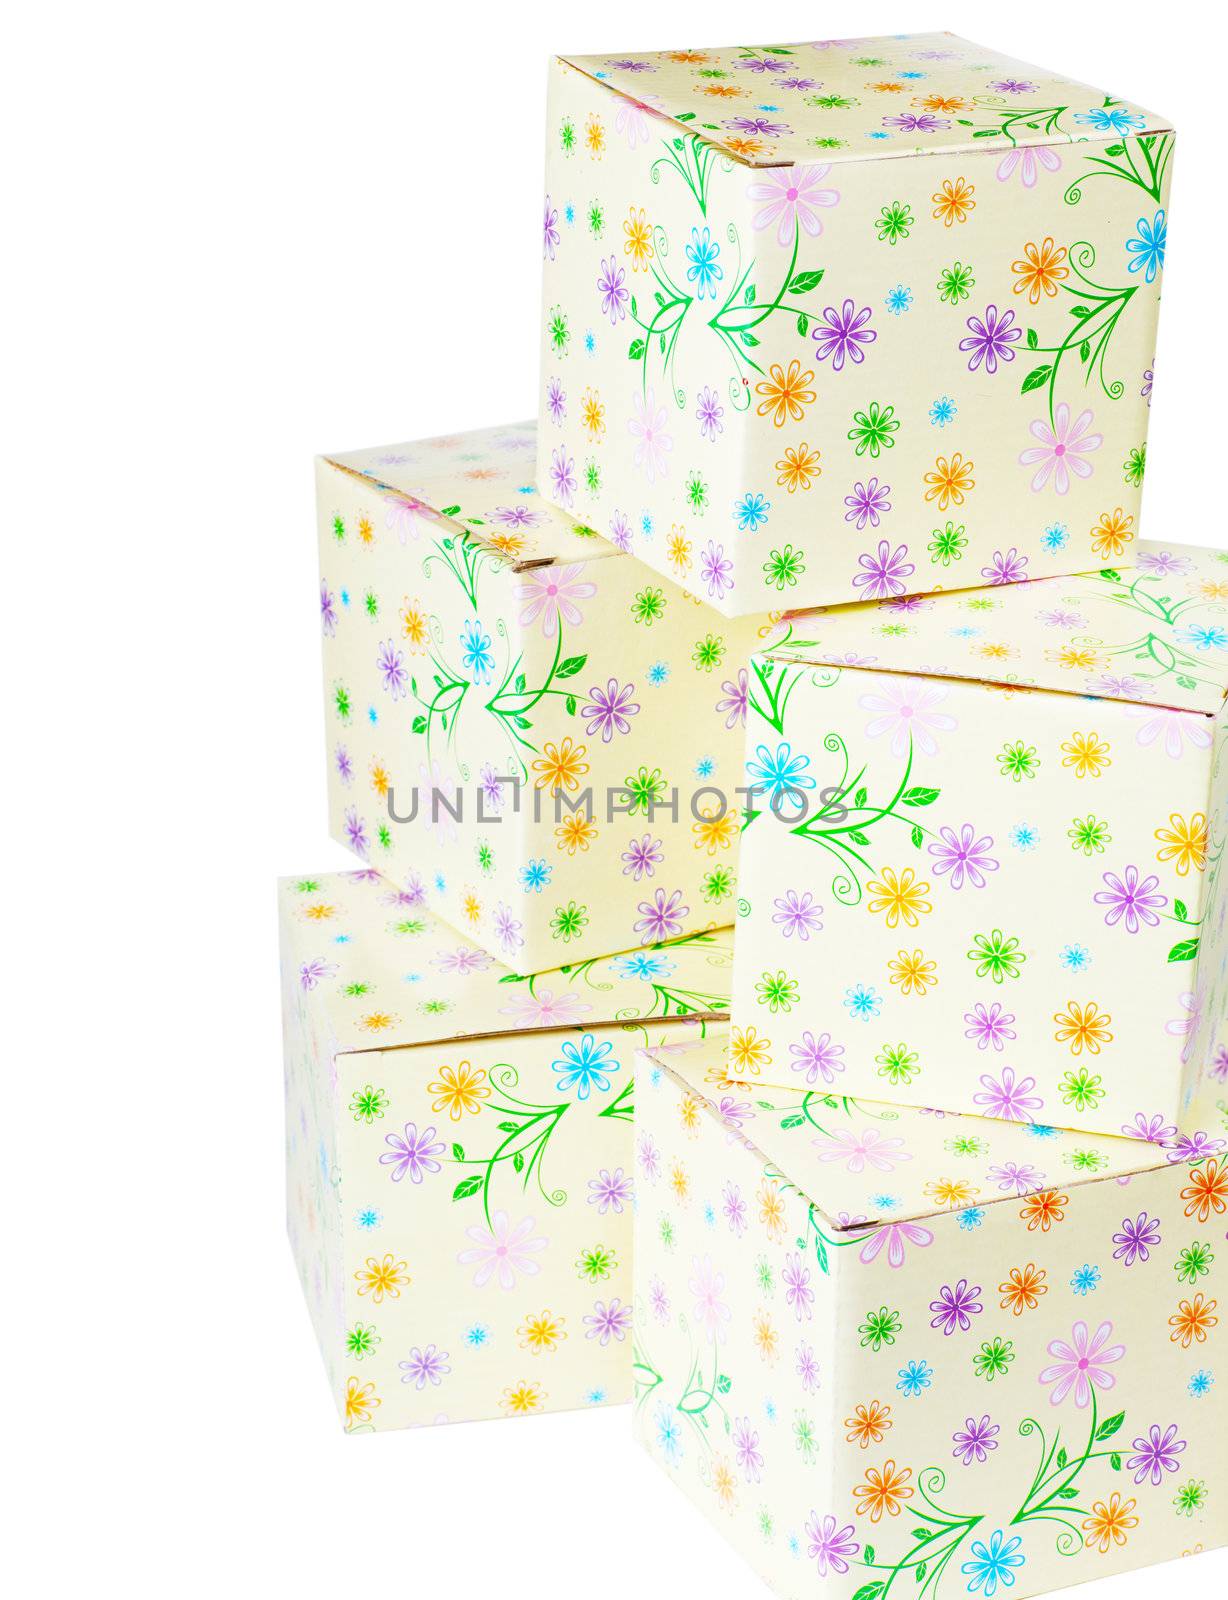 A pile of gift boxes isolated over white background